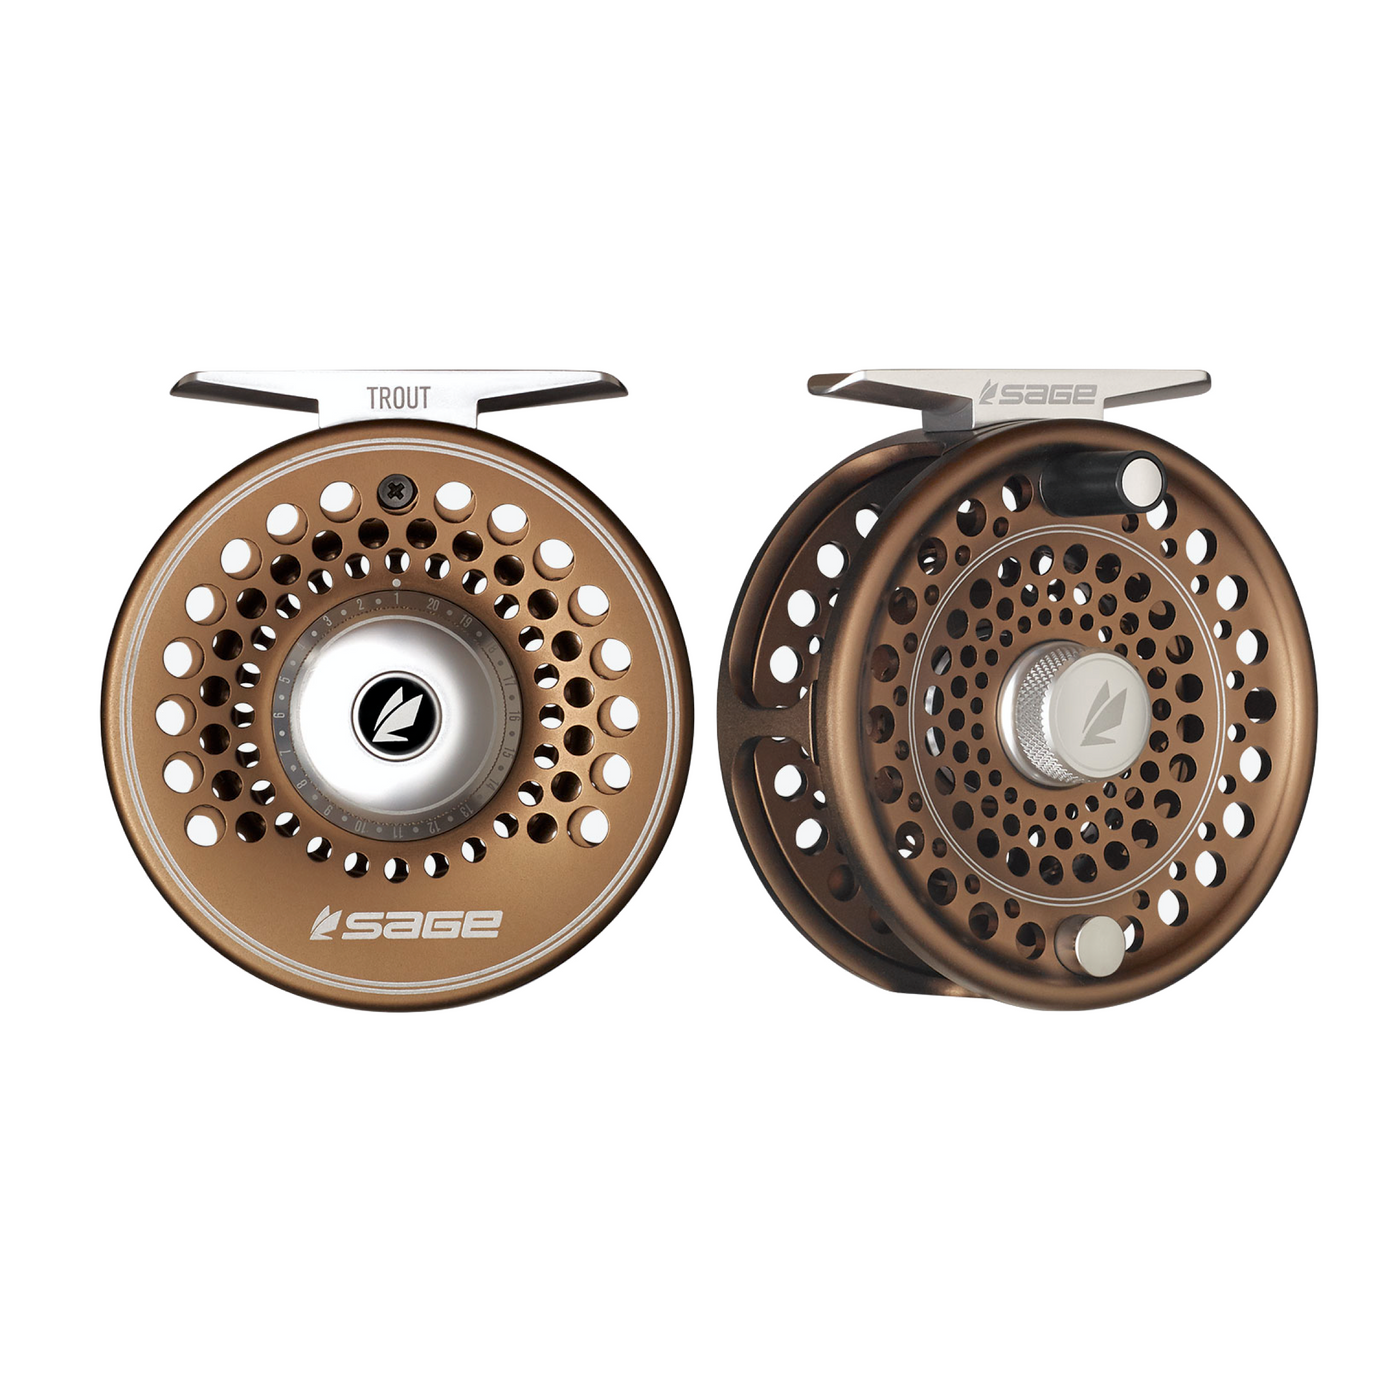 Openly slope shear sage fishing reels panel Existence married